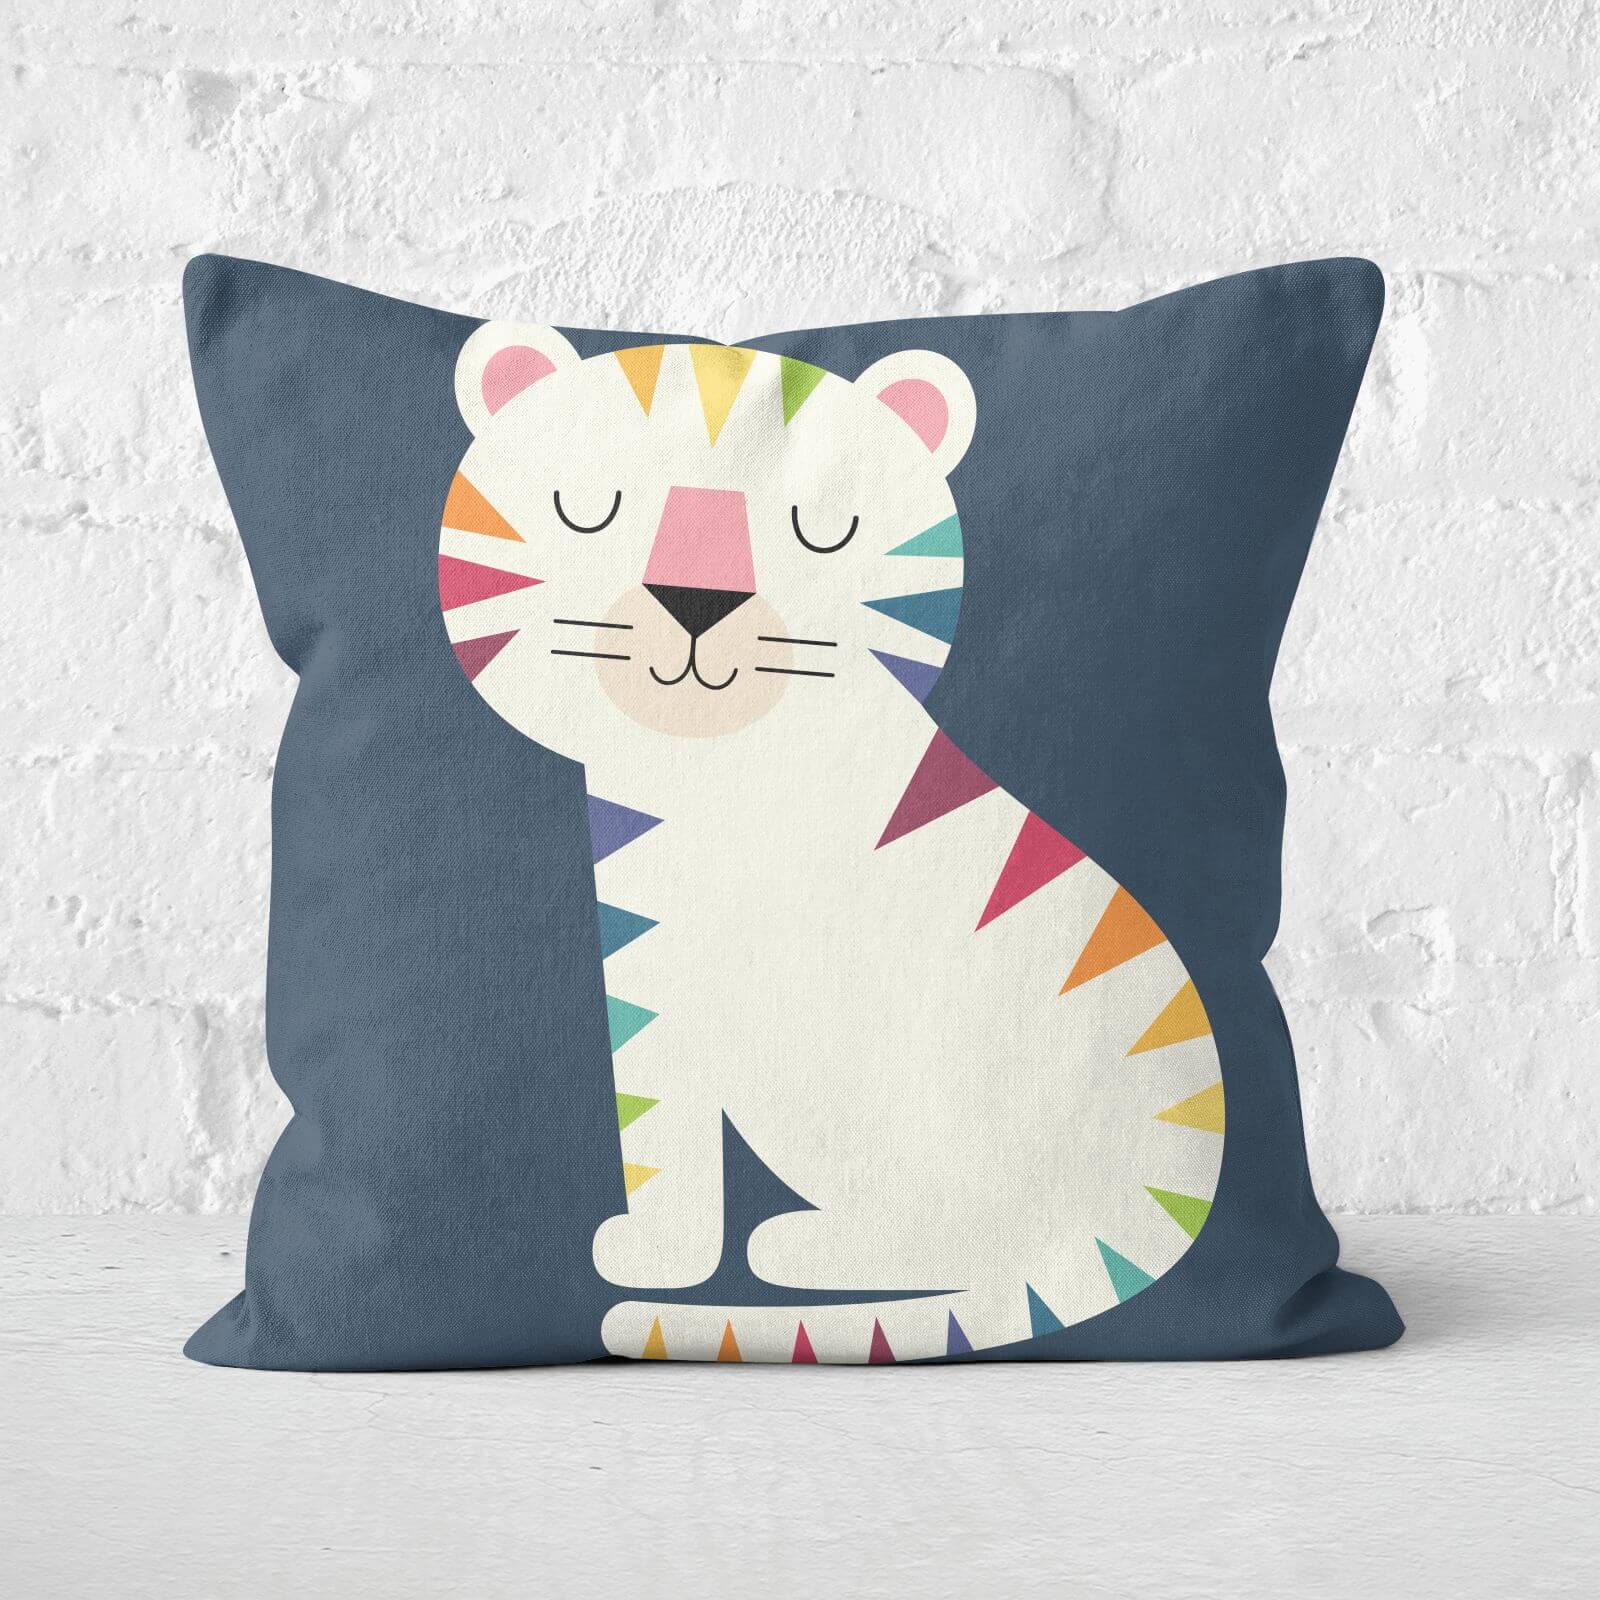 Andy Westface Beautiful Gene Square Cushion - 60x60cm - Soft Touch